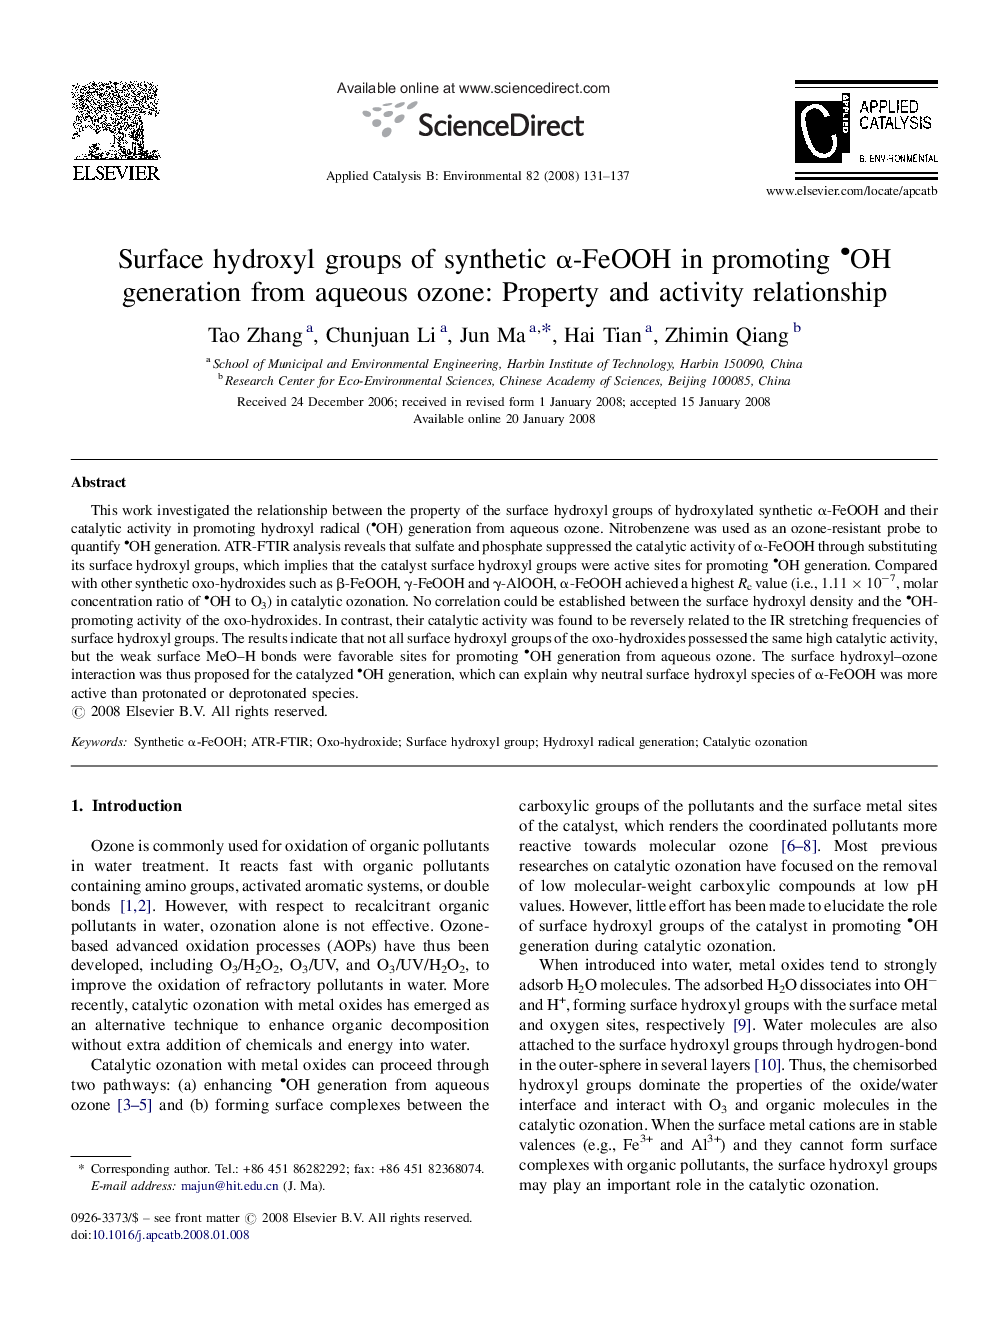 Surface hydroxyl groups of synthetic α-FeOOH in promoting OH generation from aqueous ozone: Property and activity relationship